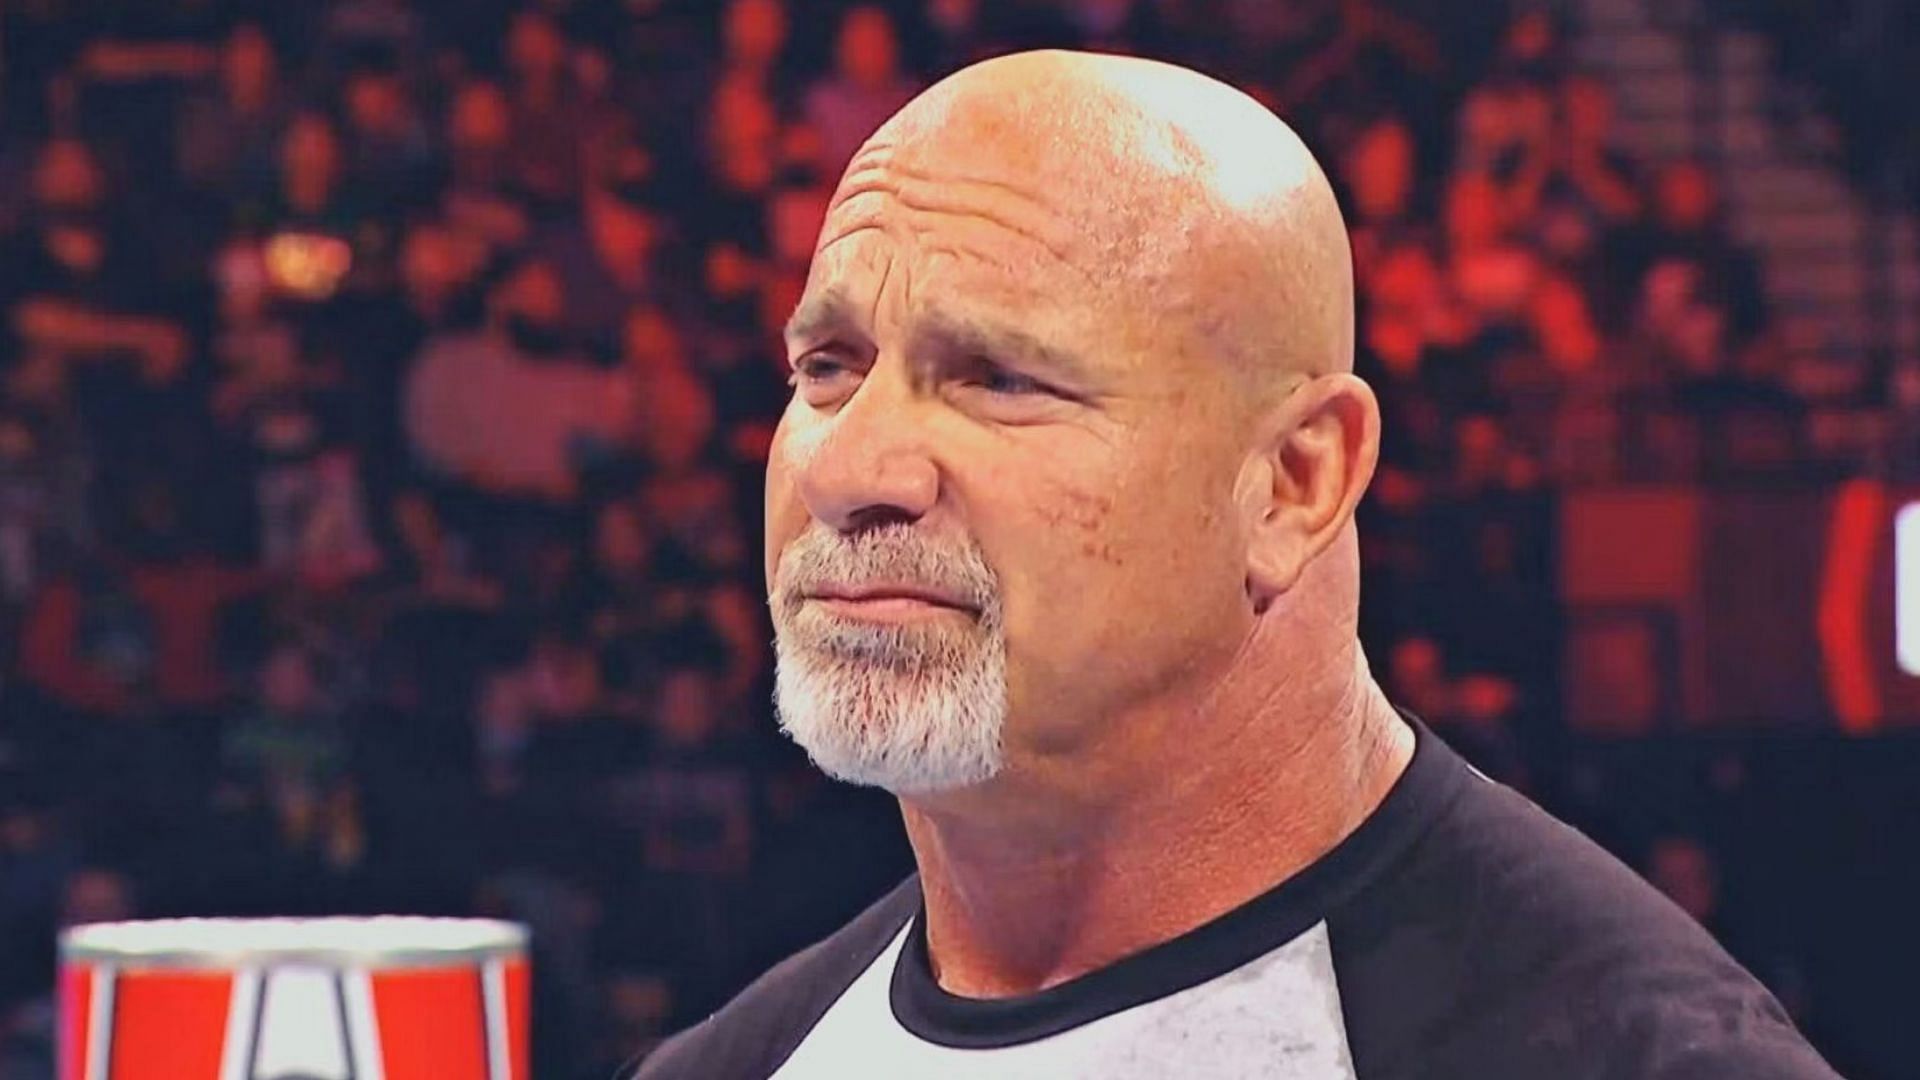 WWE Hall of Famer Goldberg is currently a free agent